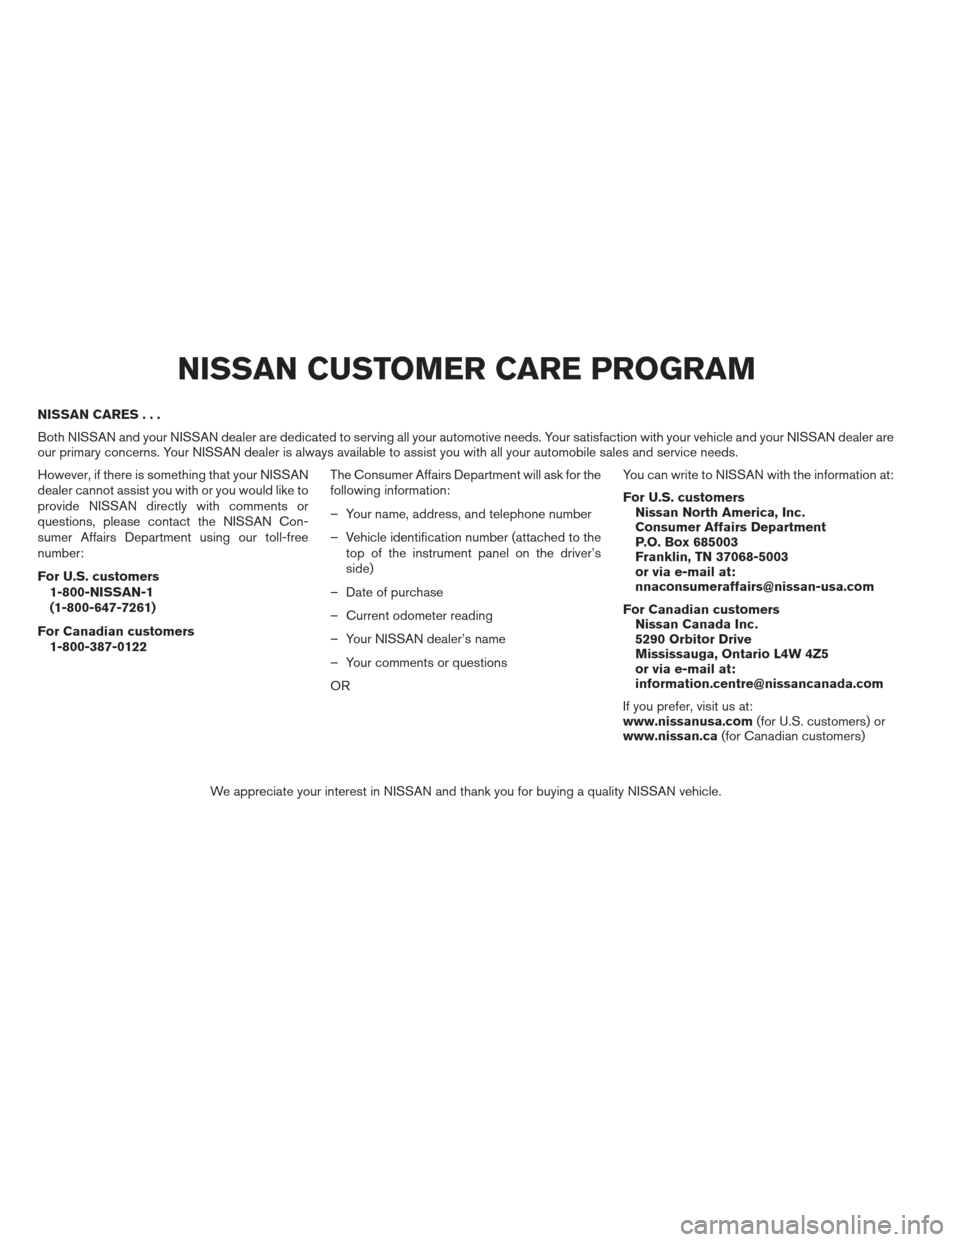 NISSAN ALTIMA 2013 L33 / 5.G Owners Manual NISSAN CARES...
Both NISSAN and your NISSAN dealer are dedicated to serving all your automotive needs. Your satisfaction with your vehicle and your NISSAN dealer are
our primary concerns. Your NISSAN 